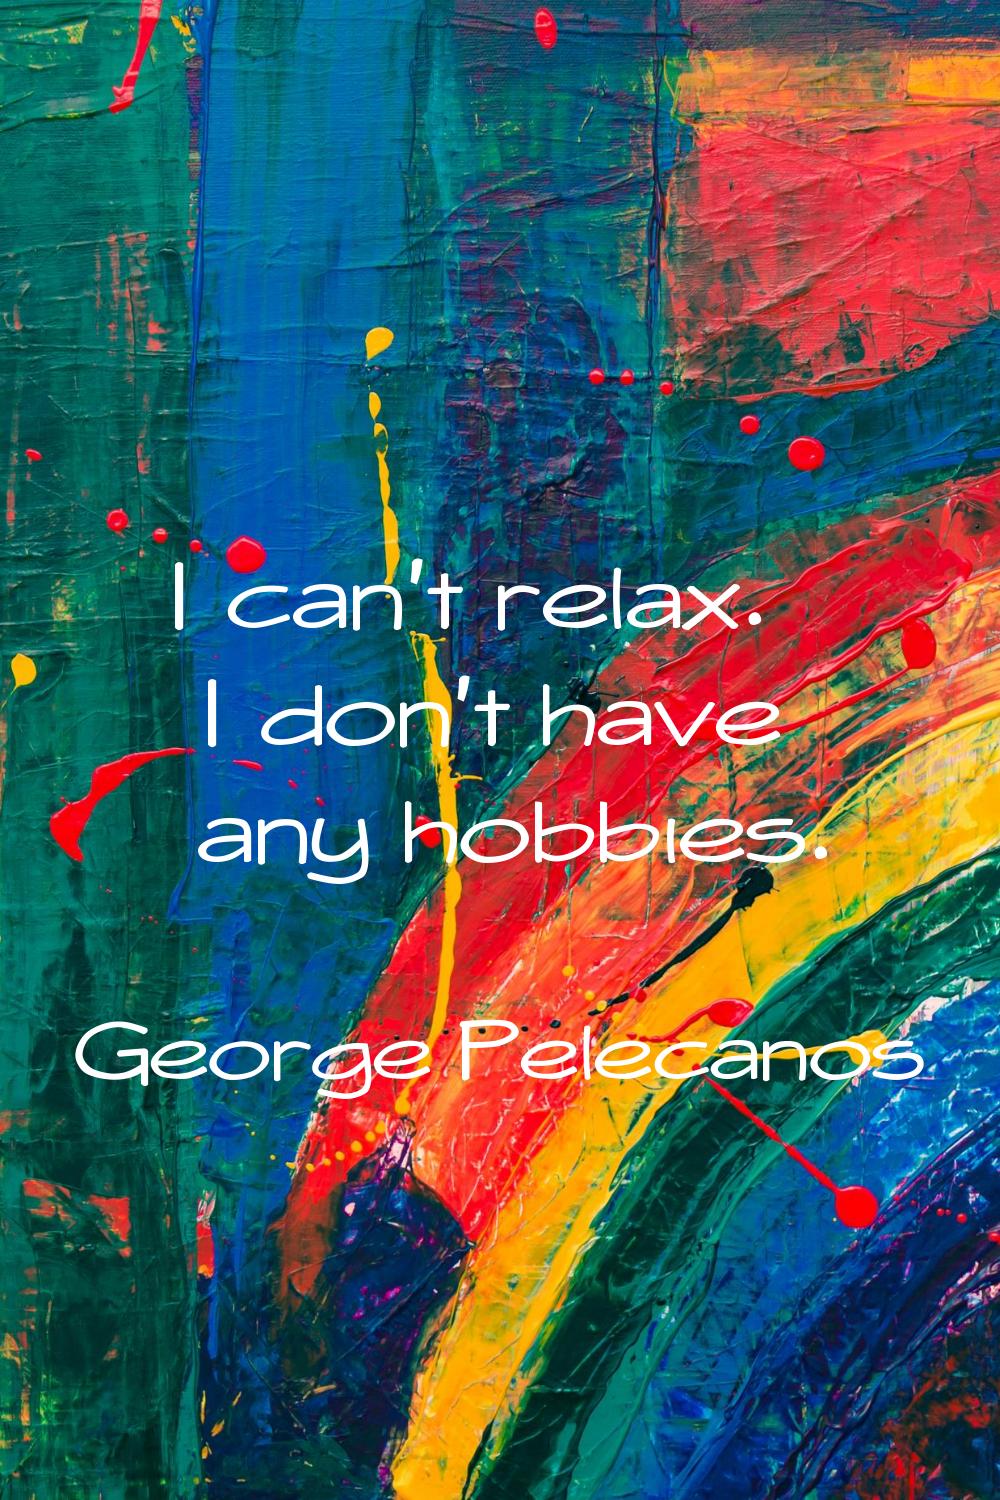 I can't relax. I don't have any hobbies.